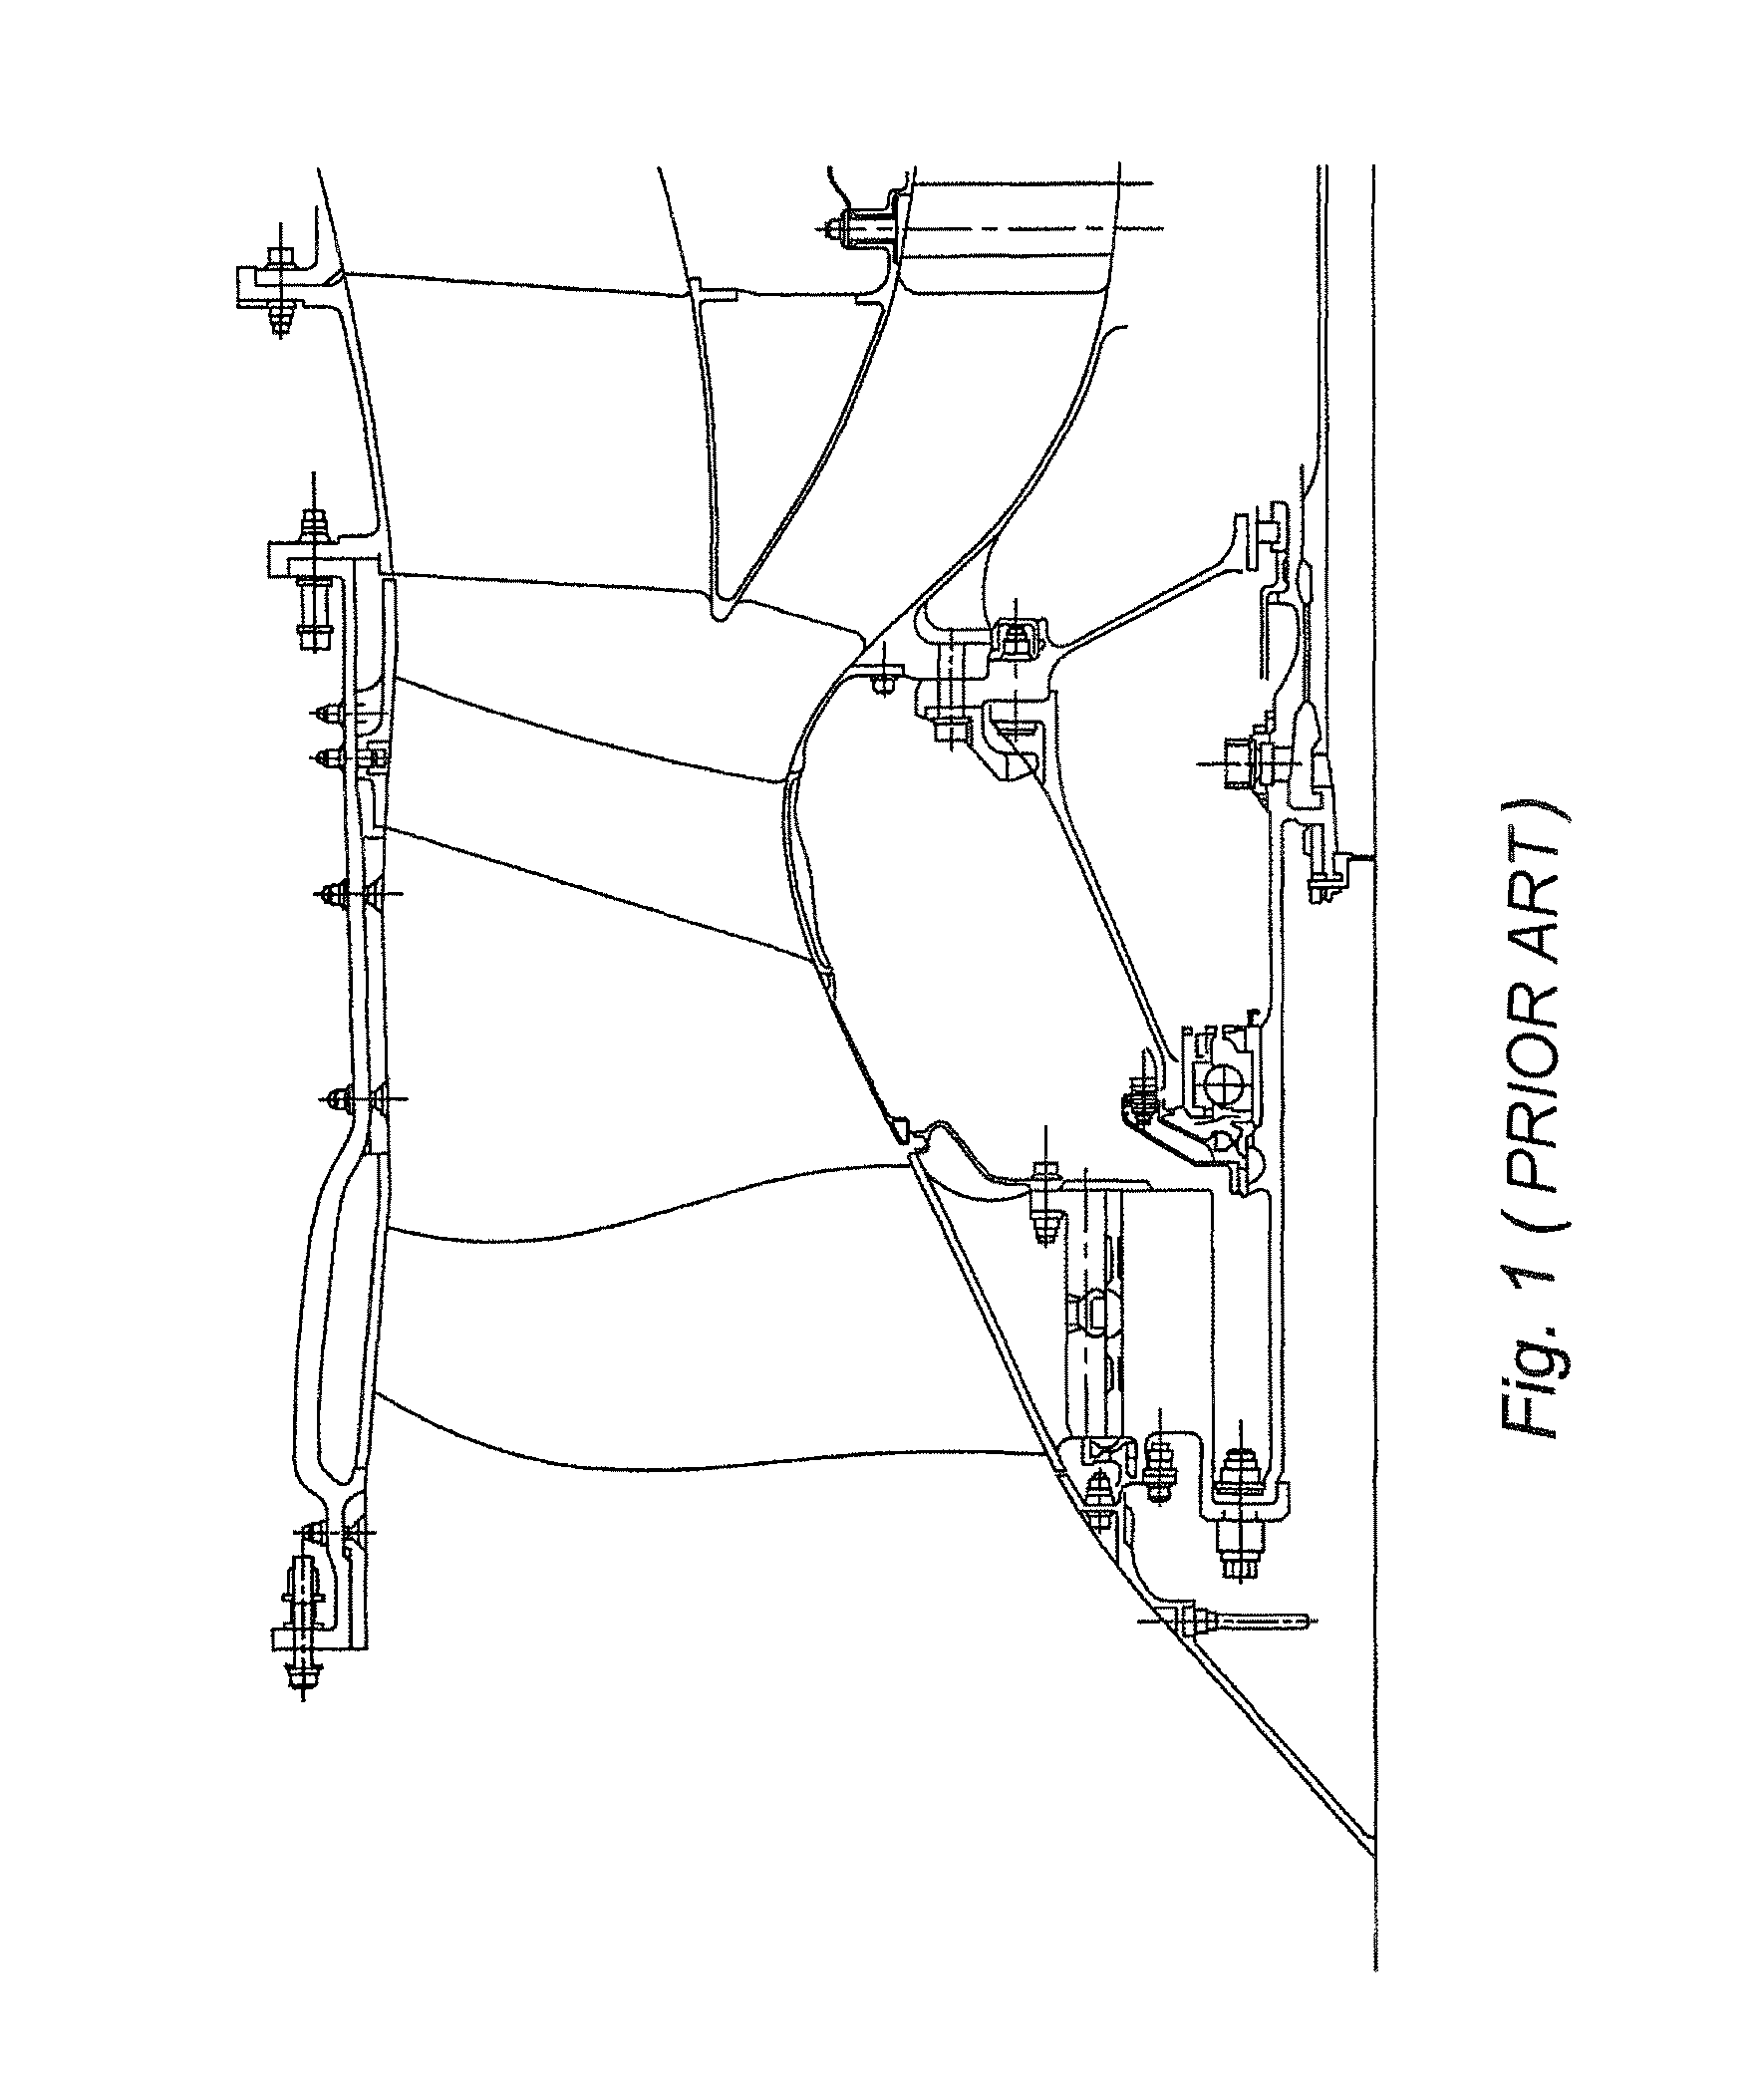 Device for attaching a stator vane to a turbomachine annular casing, turbojet engine incorporating the device and method for mounting the vane